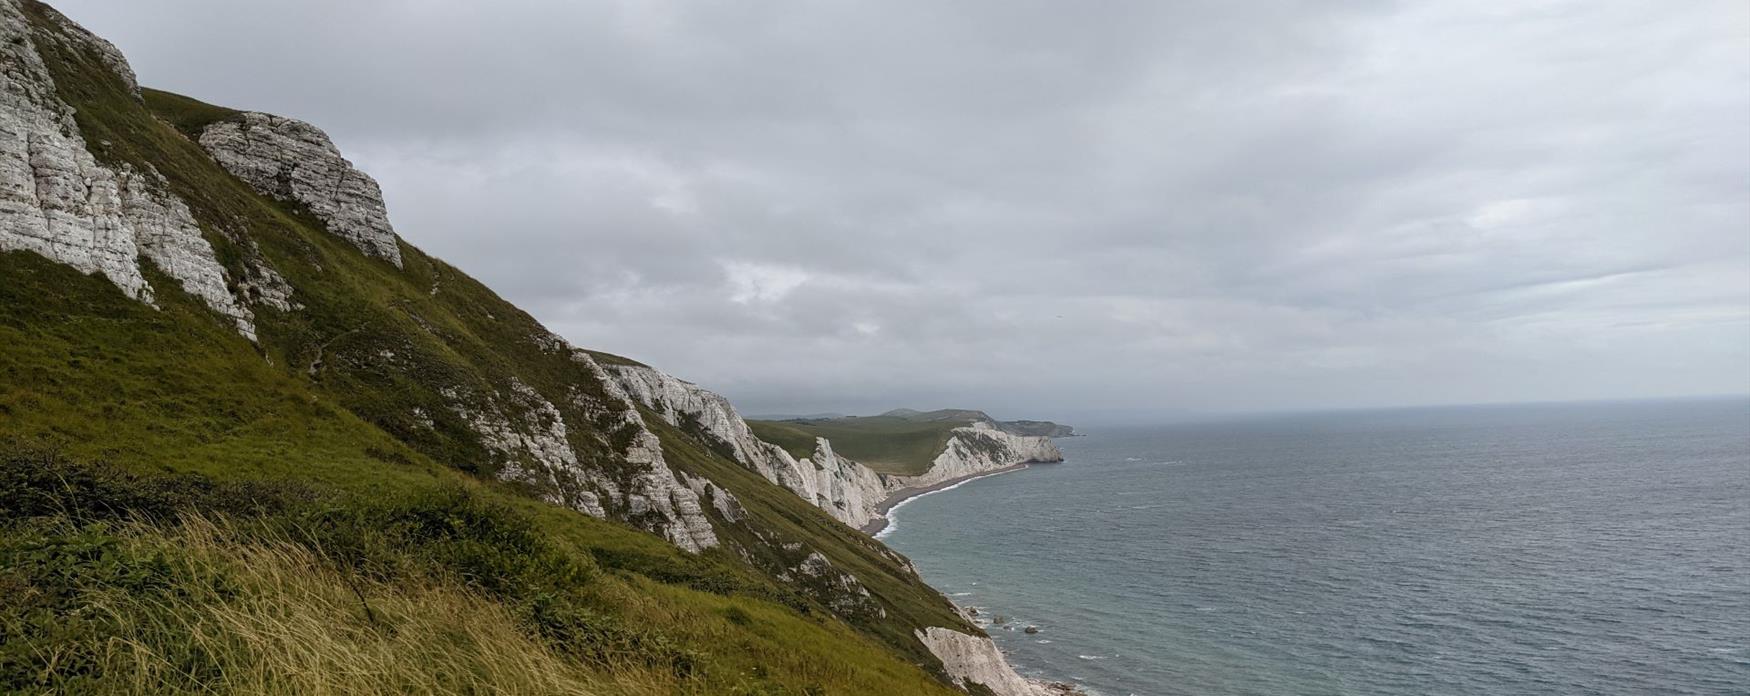 A close up of grassy cliffs on the left side of the image. Under the grassy vegetation, the chalk cliffs are bright white. The sky above is grey and stormy. The sea on the right of the image reflects the grey clouds.